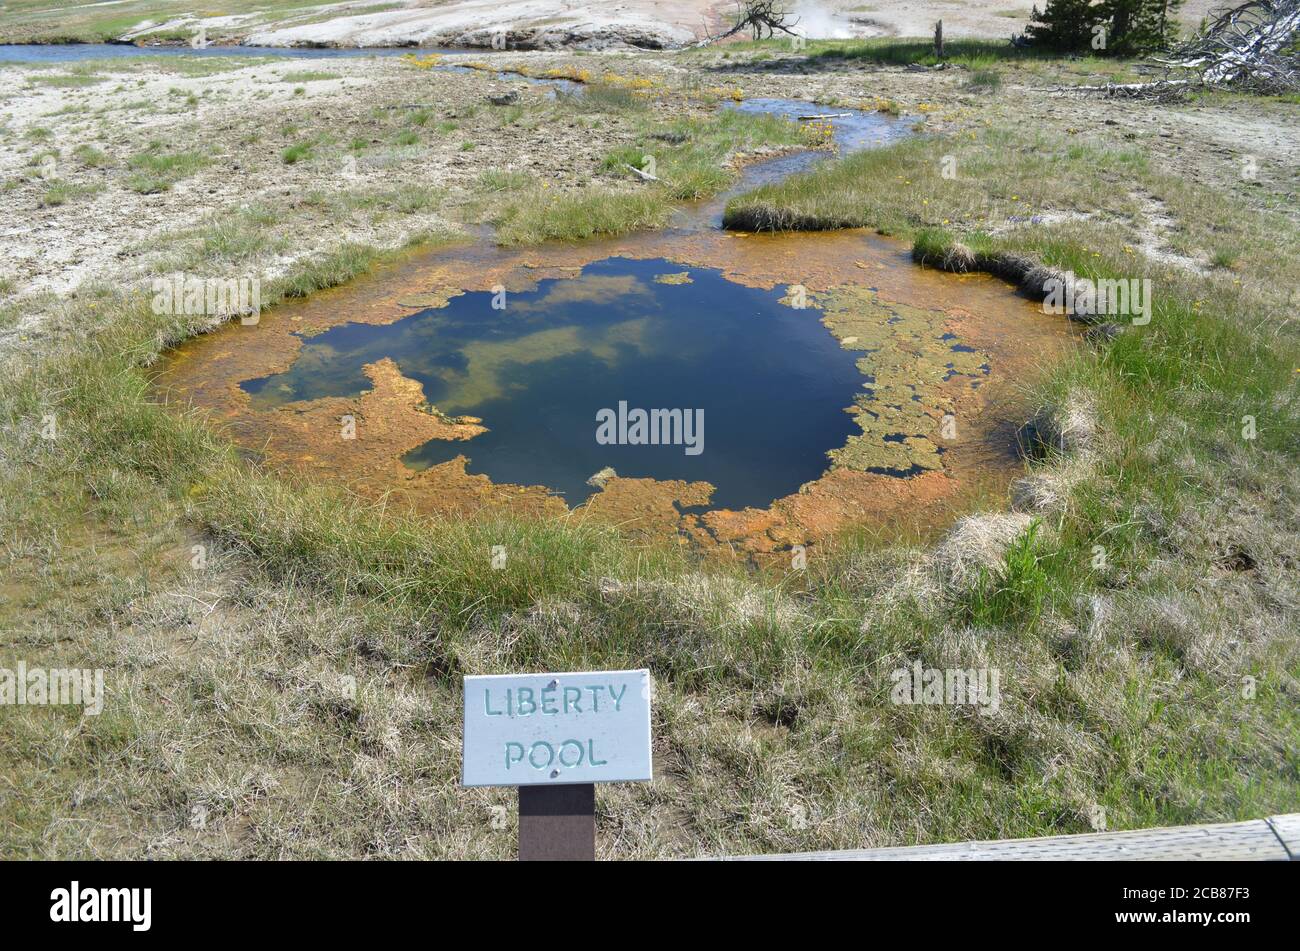 YELLOWSTONE NATIONAL PARK, WYOMING - 8. JUNI 2017: Liberty Pool in der Sawmill Group fließt in den Firehole River im Upper Geyser Basin Stockfoto